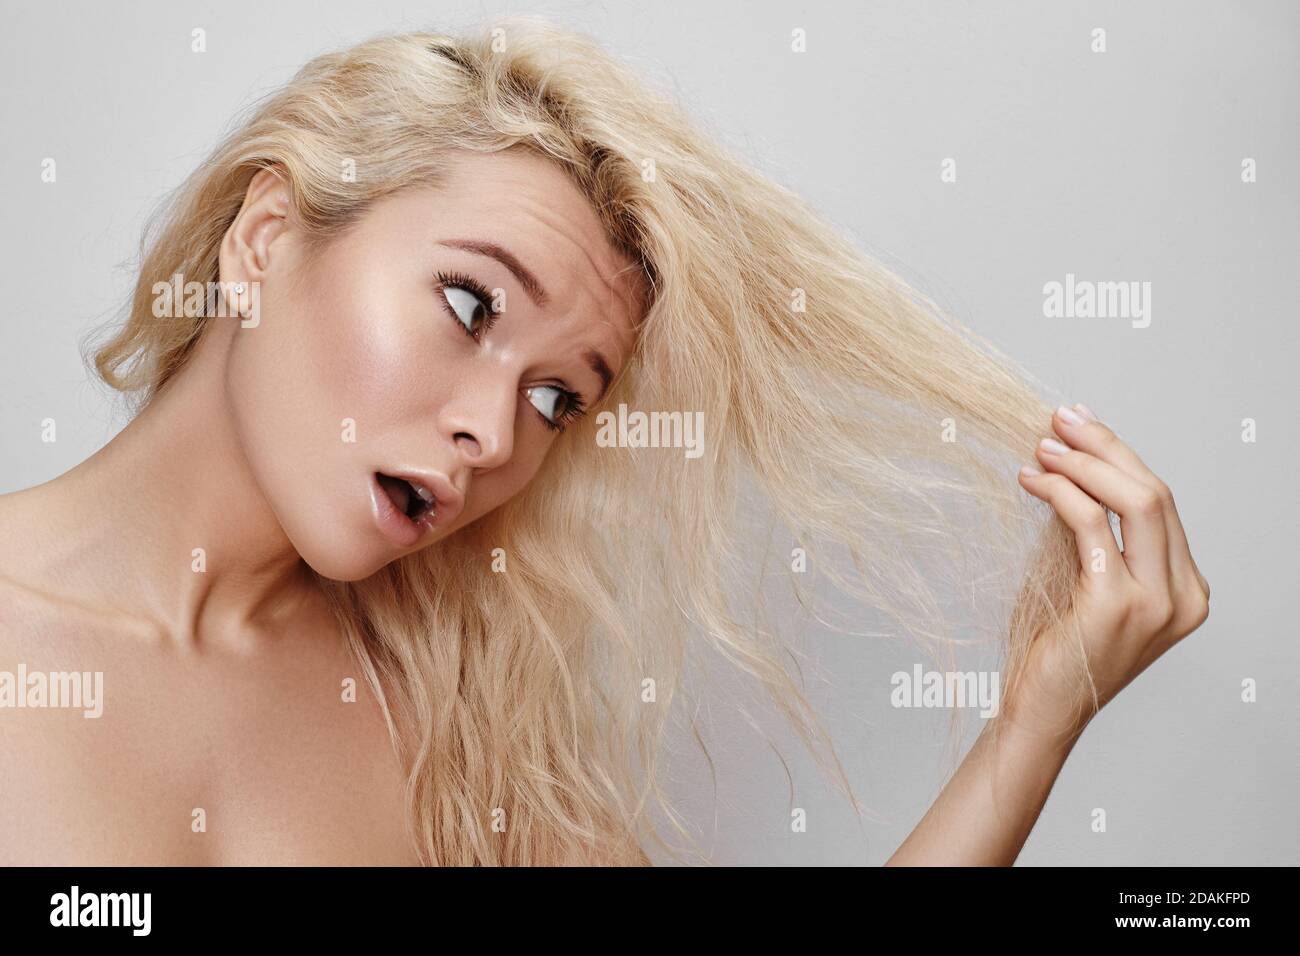 Bad hair day. Beautiful woman with messed up hair. Unhappy grimacing face. Blond bleaching hairstyle with problem brittle hair Stock Photo